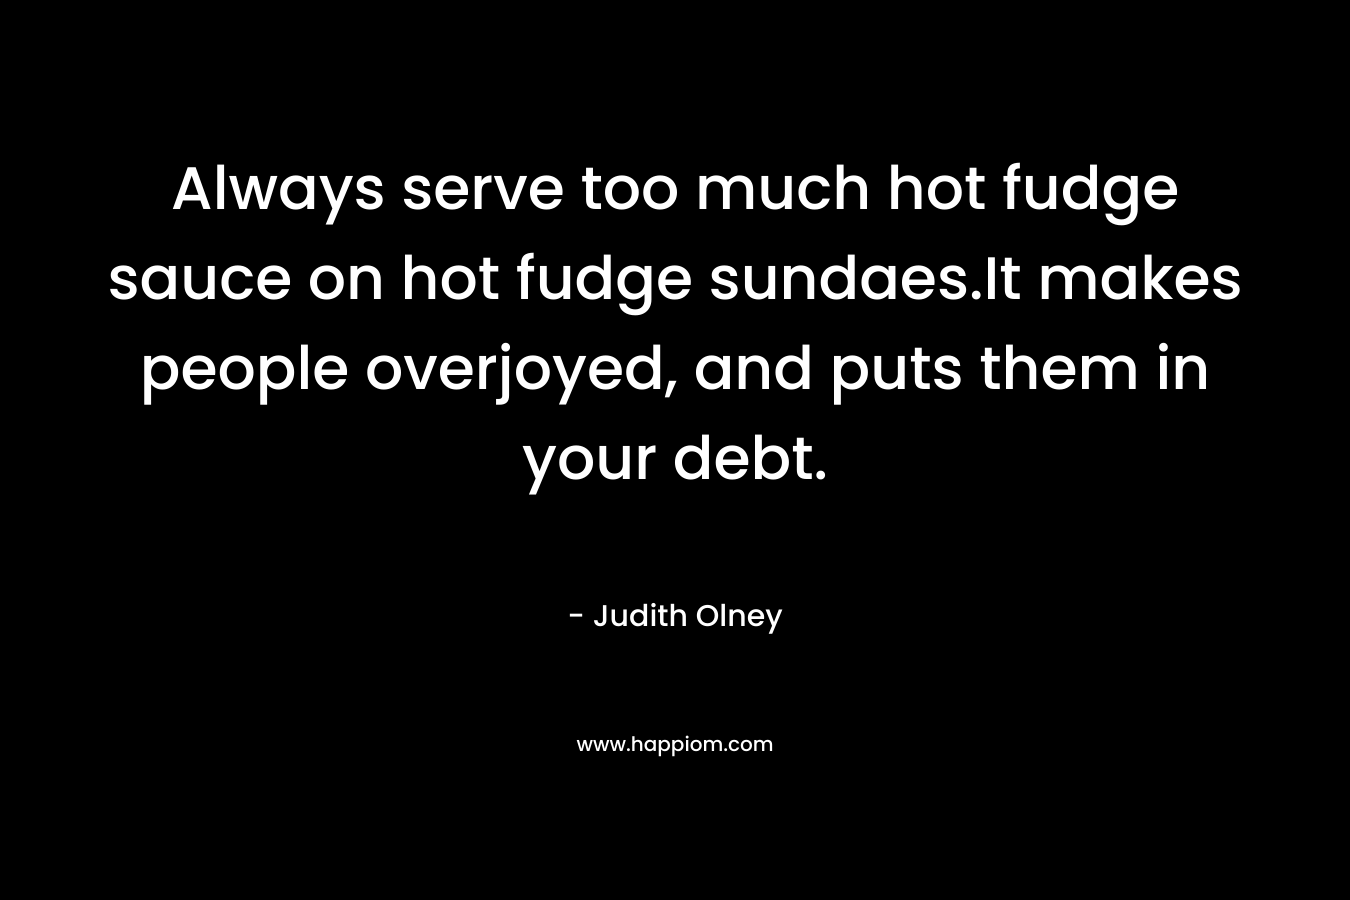 Always serve too much hot fudge sauce on hot fudge sundaes.It makes people overjoyed, and puts them in your debt.